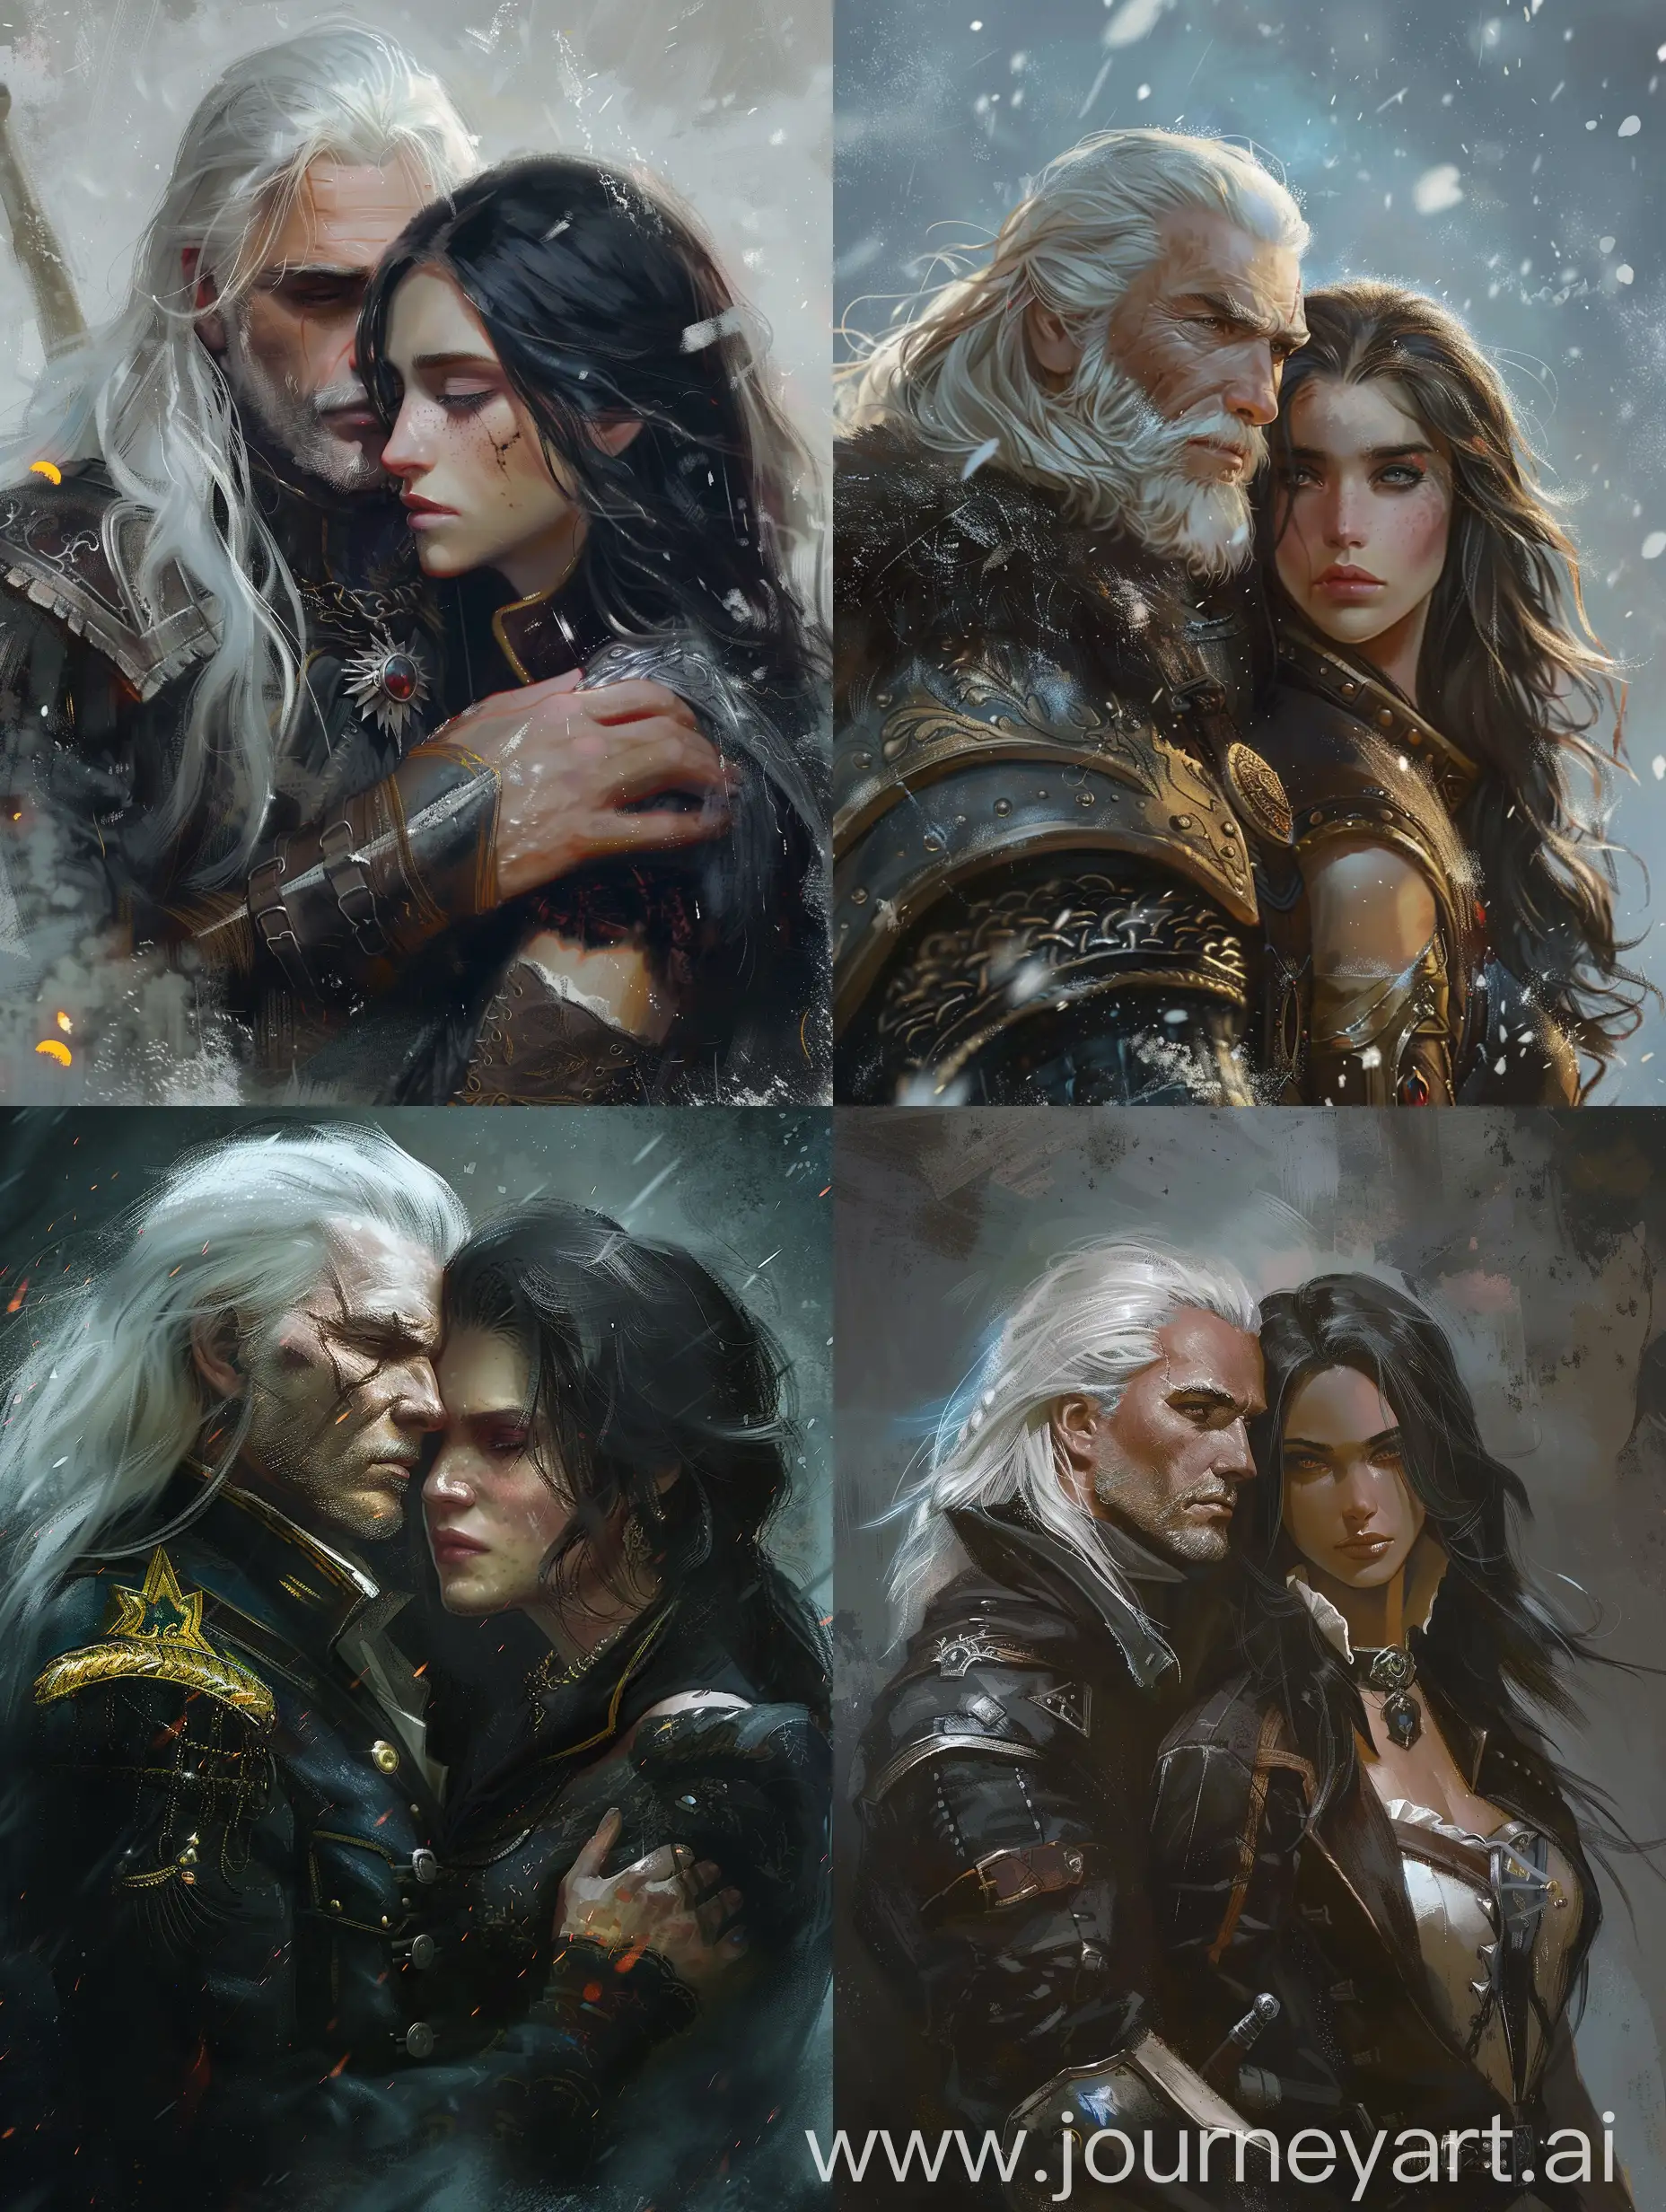 Fantasy-Portrait-of-WhiteHaired-Man-and-Brunette-Woman-Rectors-of-Icy-Academy